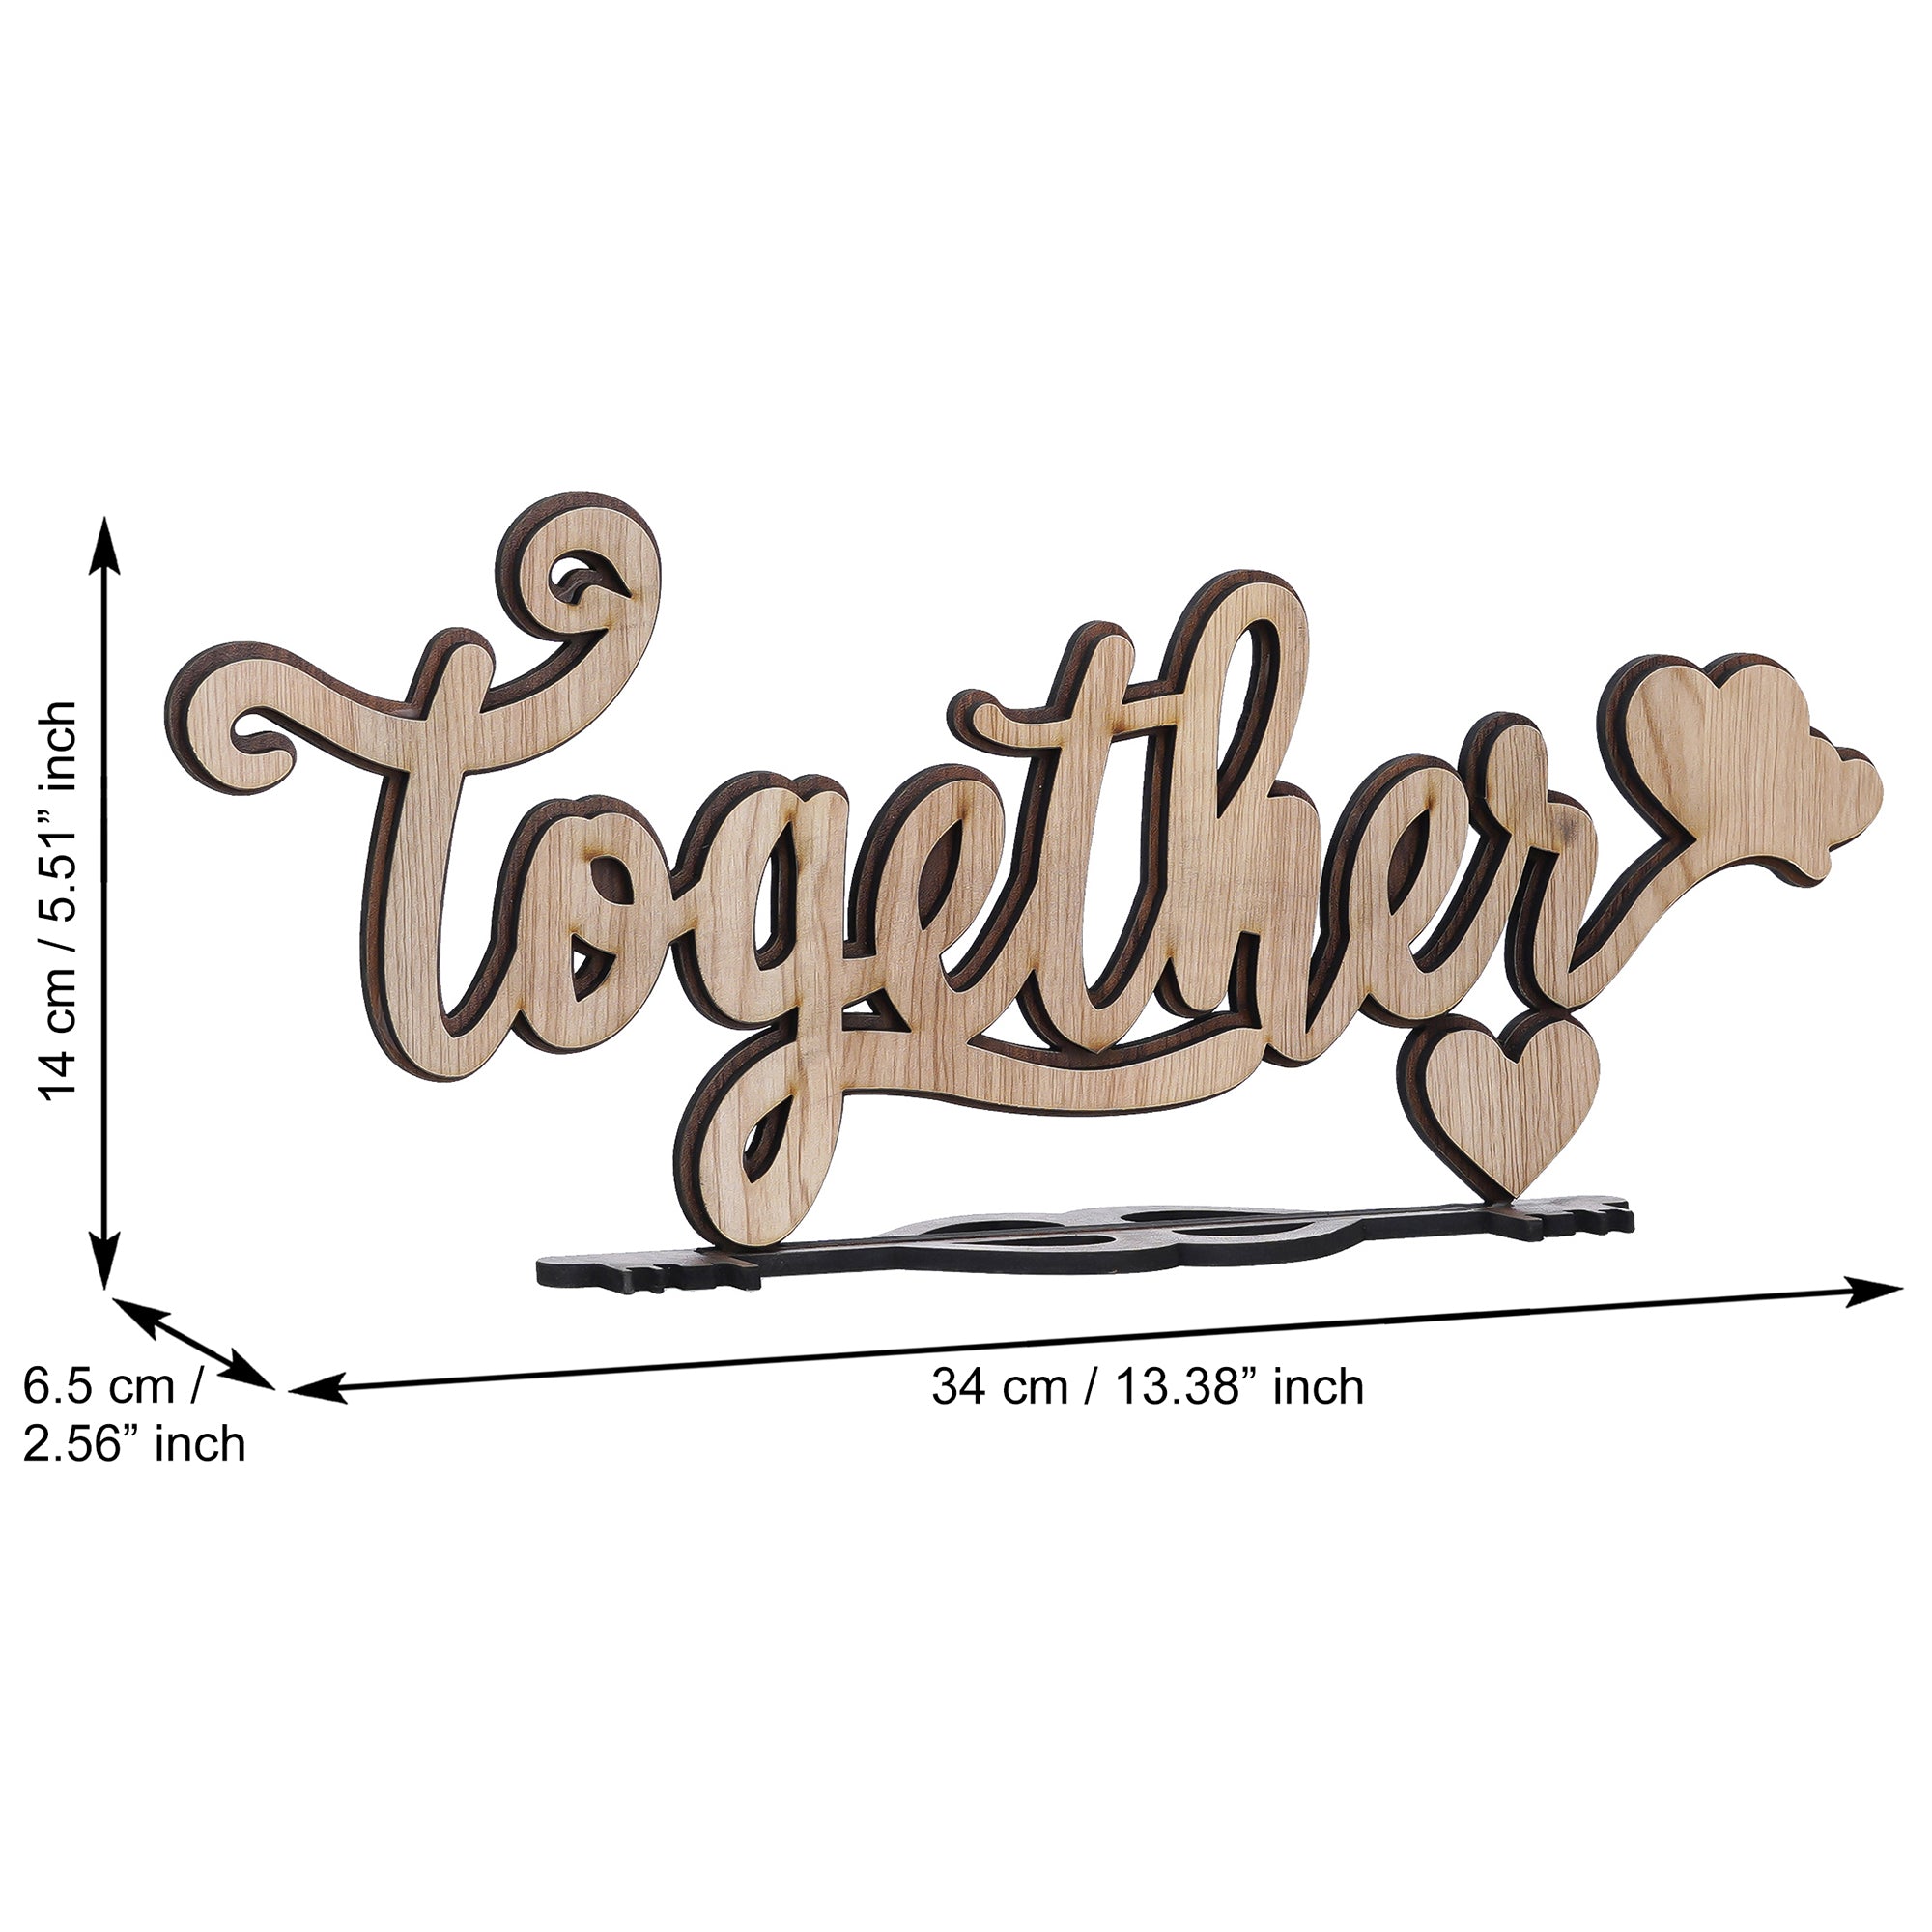 Valentine Combo of Pack of 8 Love Gift Cards, Golden Rose Gift Set, "Together" Brown Wooden Puzzle Showpiece With Stand 6